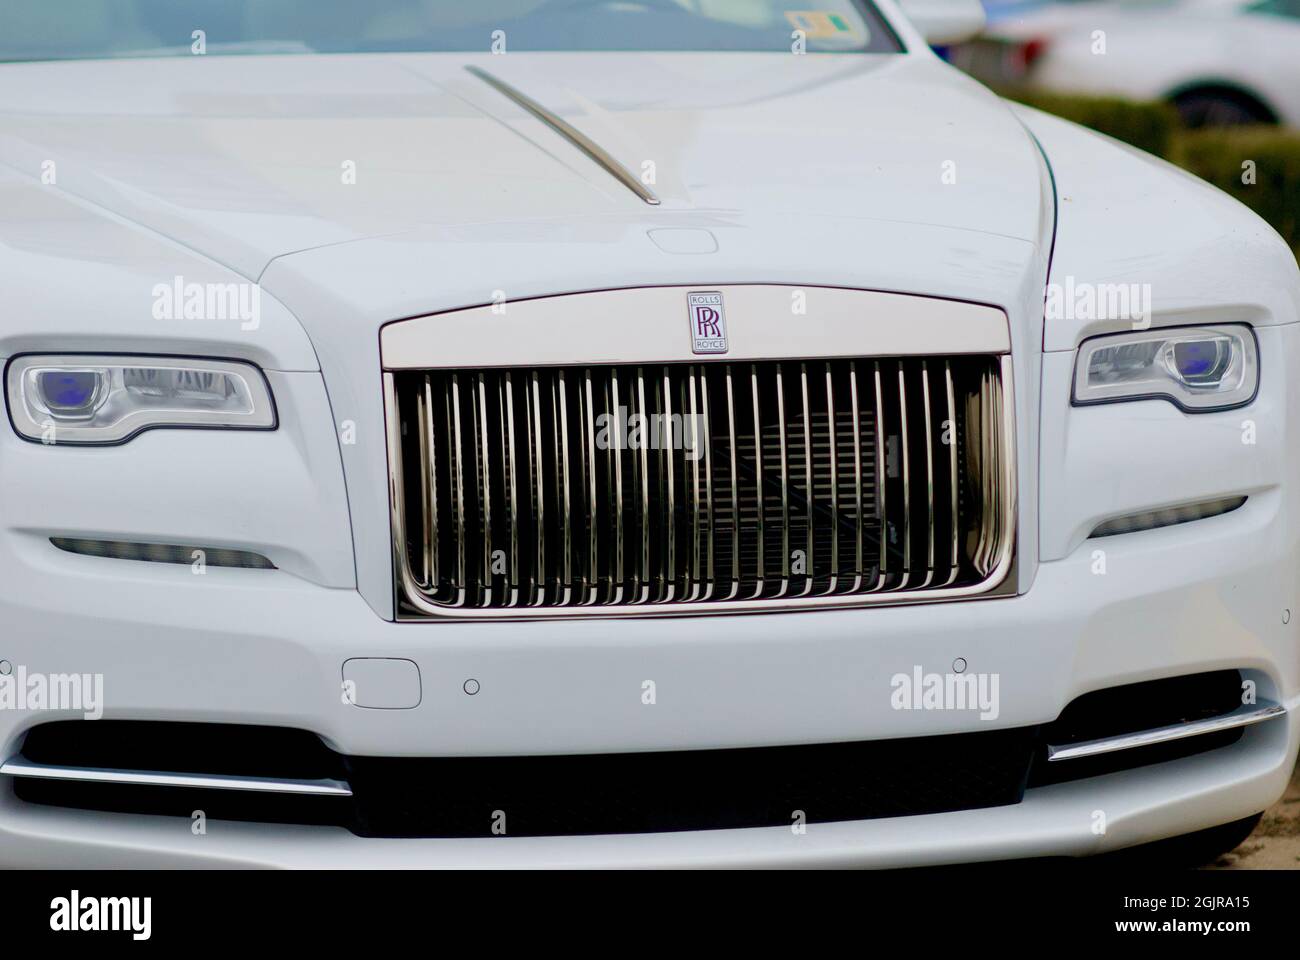 Sterling, Virginia, USA - December 9, 2018: Close-up of a new Rolls-Royce luxury vehicle parked at the Rolls-Royce Motor Cars Sterling car dealership. Stock Photo